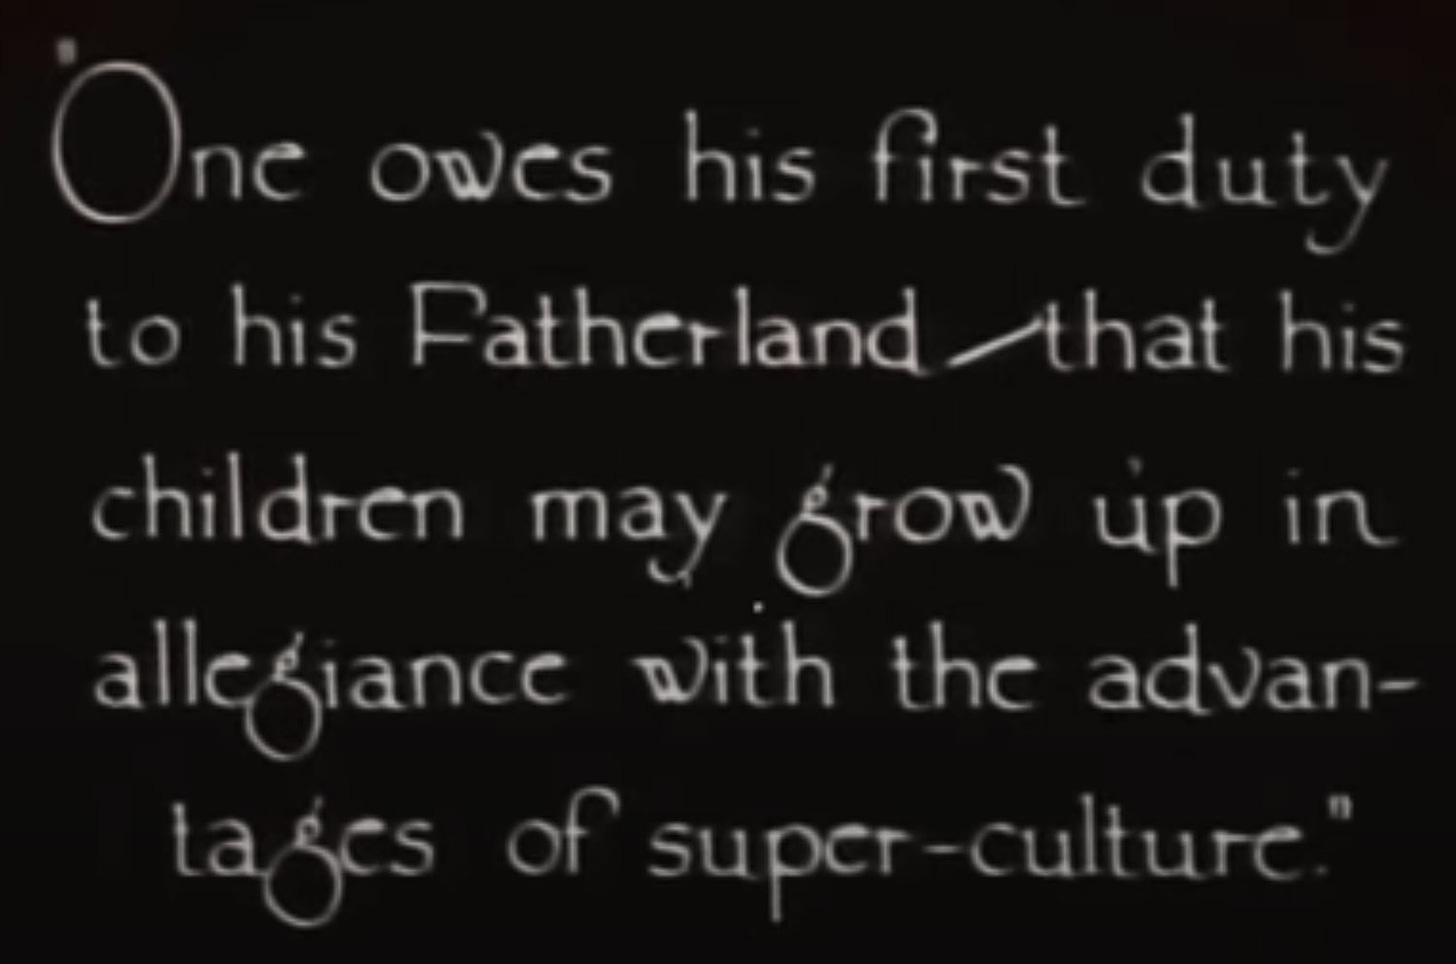 Intertitle from 1921 film The Four Horsemen of the Apocalypse: a character of German descent living in Argentina explains why he wants to return to Germany - “One owes his first duty to his Fatherland - that his children may grow up in allegiance with the advantages of super-culture”